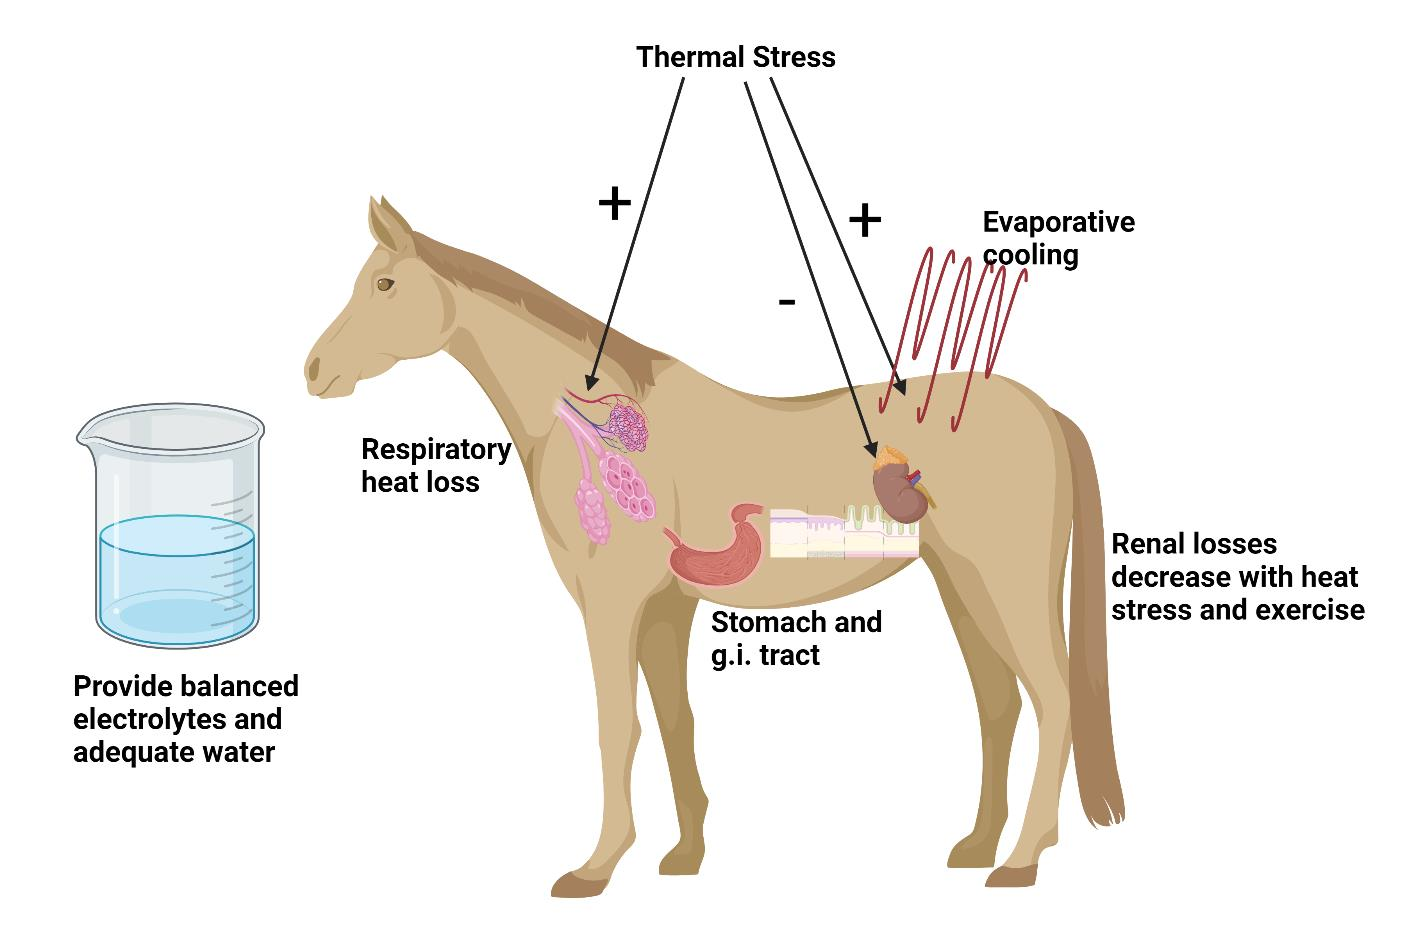 How to Feed a Horse: Understanding the Basic Principles of Horse Nutrition